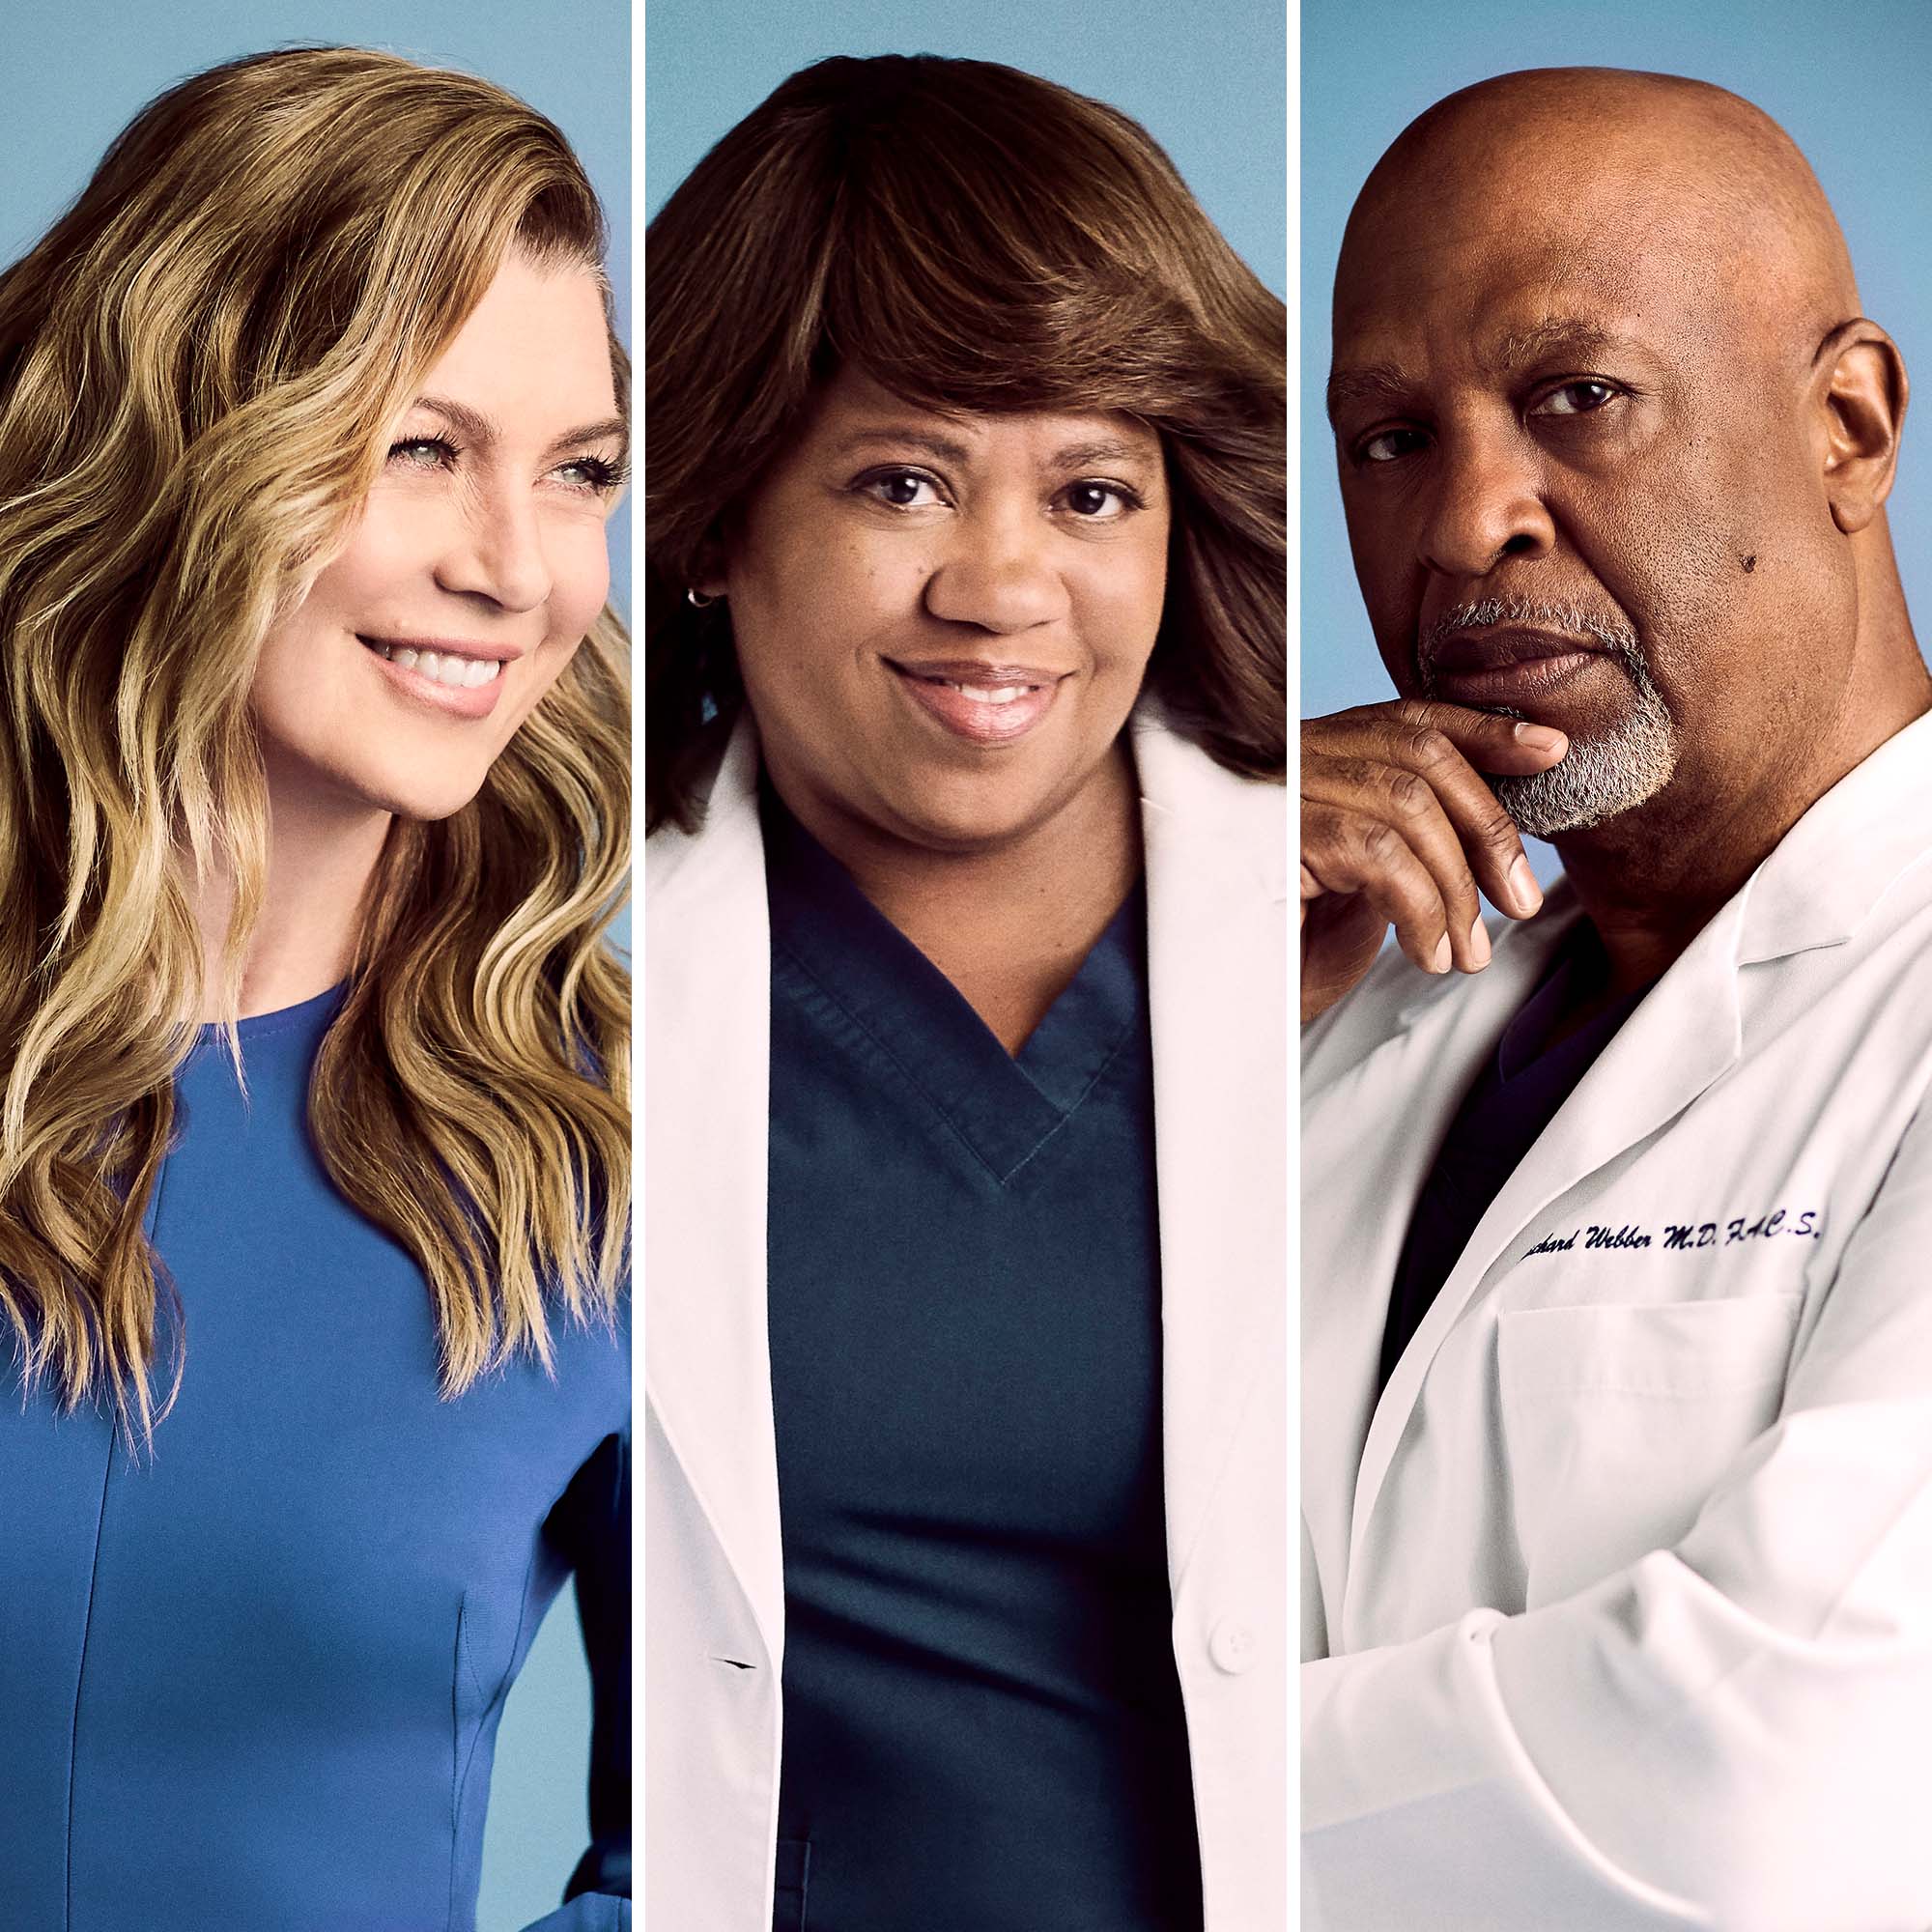 Character portraits (from left): Meredith Grey (played by Ellen Pomepo), Miranda Bailey (played by Chandra Wilson), and Richard Webber (played by James Pickens Jr.)